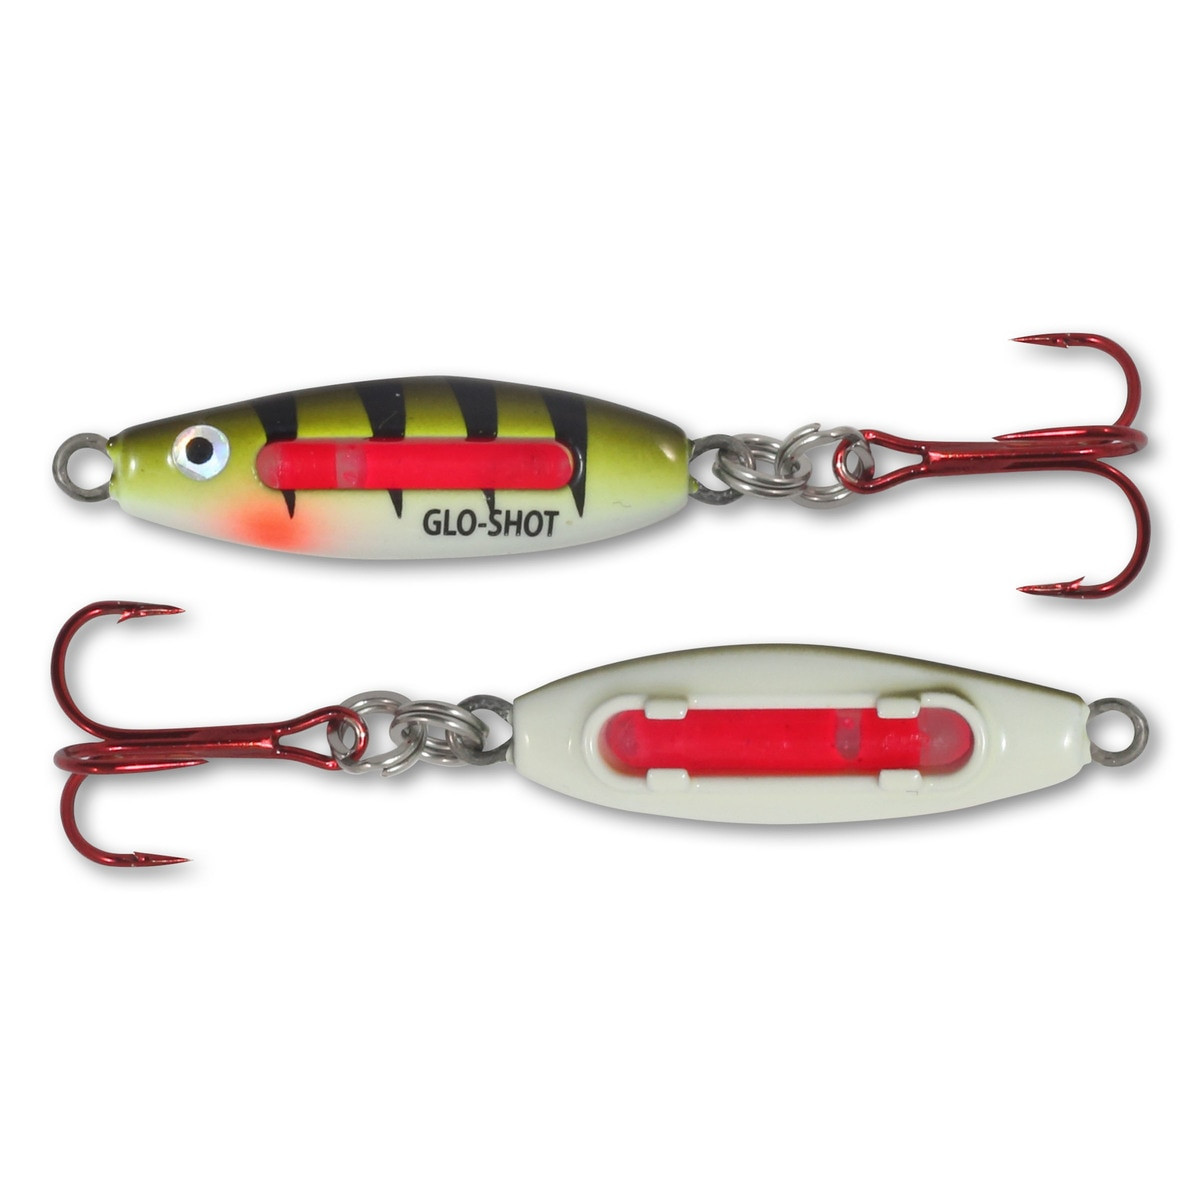 https://cs1.0ps.us/original/opplanet-northland-fishing-tackle-glo-shot-fire-belly-spoon-uv-green-perch-3-8-oz-gsfb5-23-main